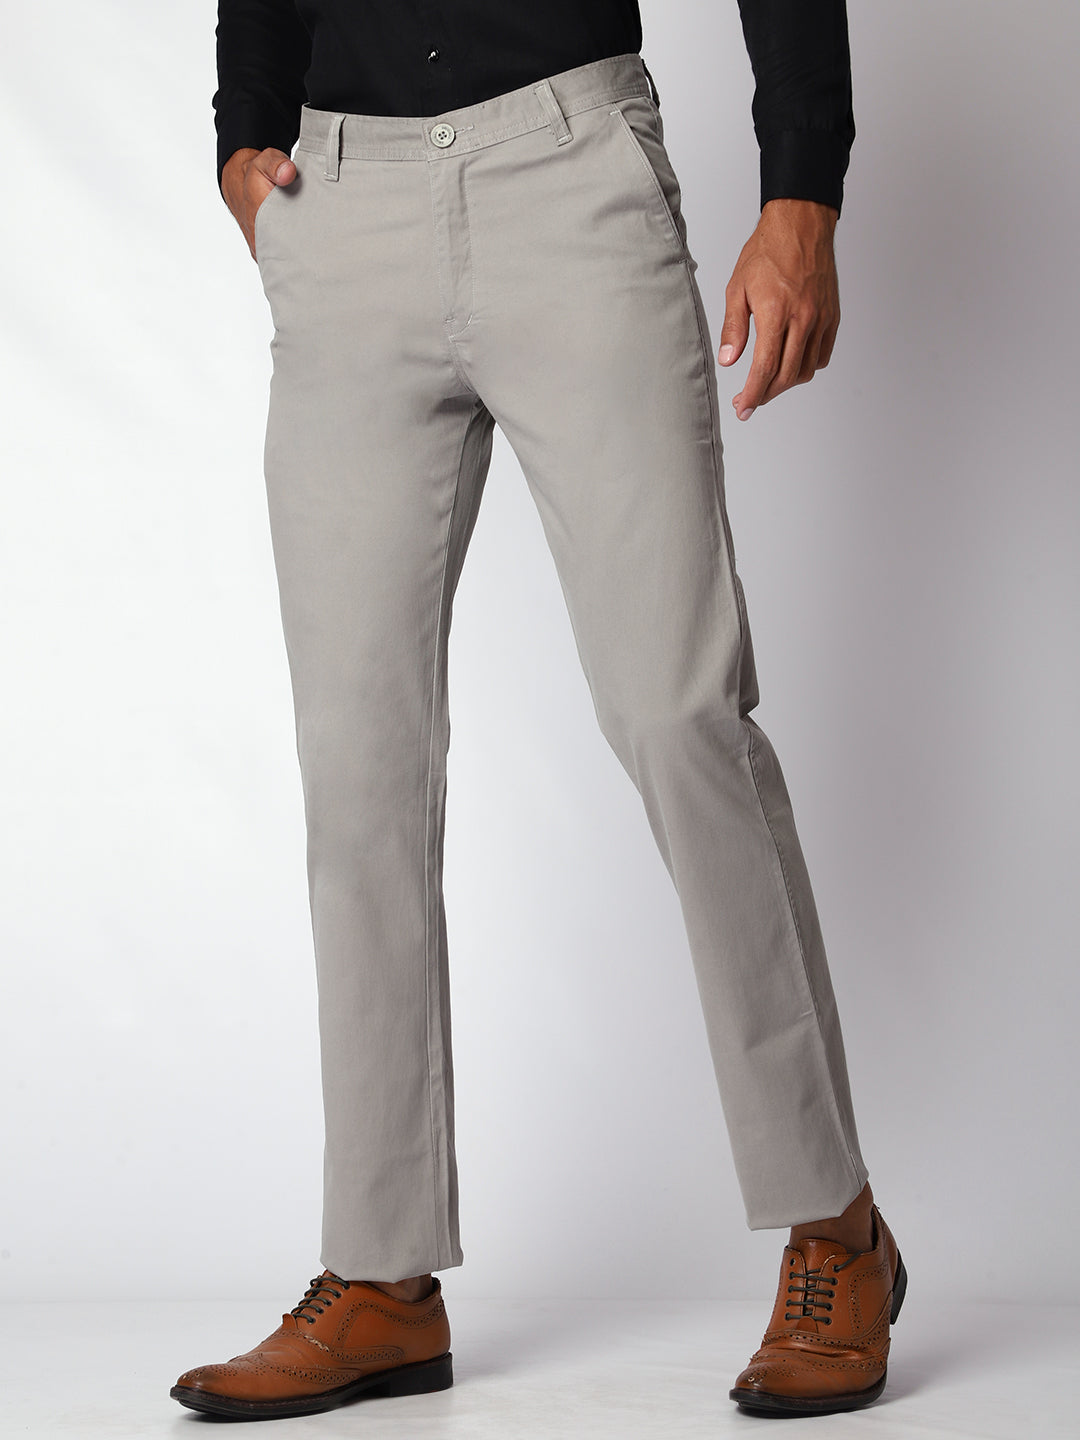 Grey Casual Chinos For Men.